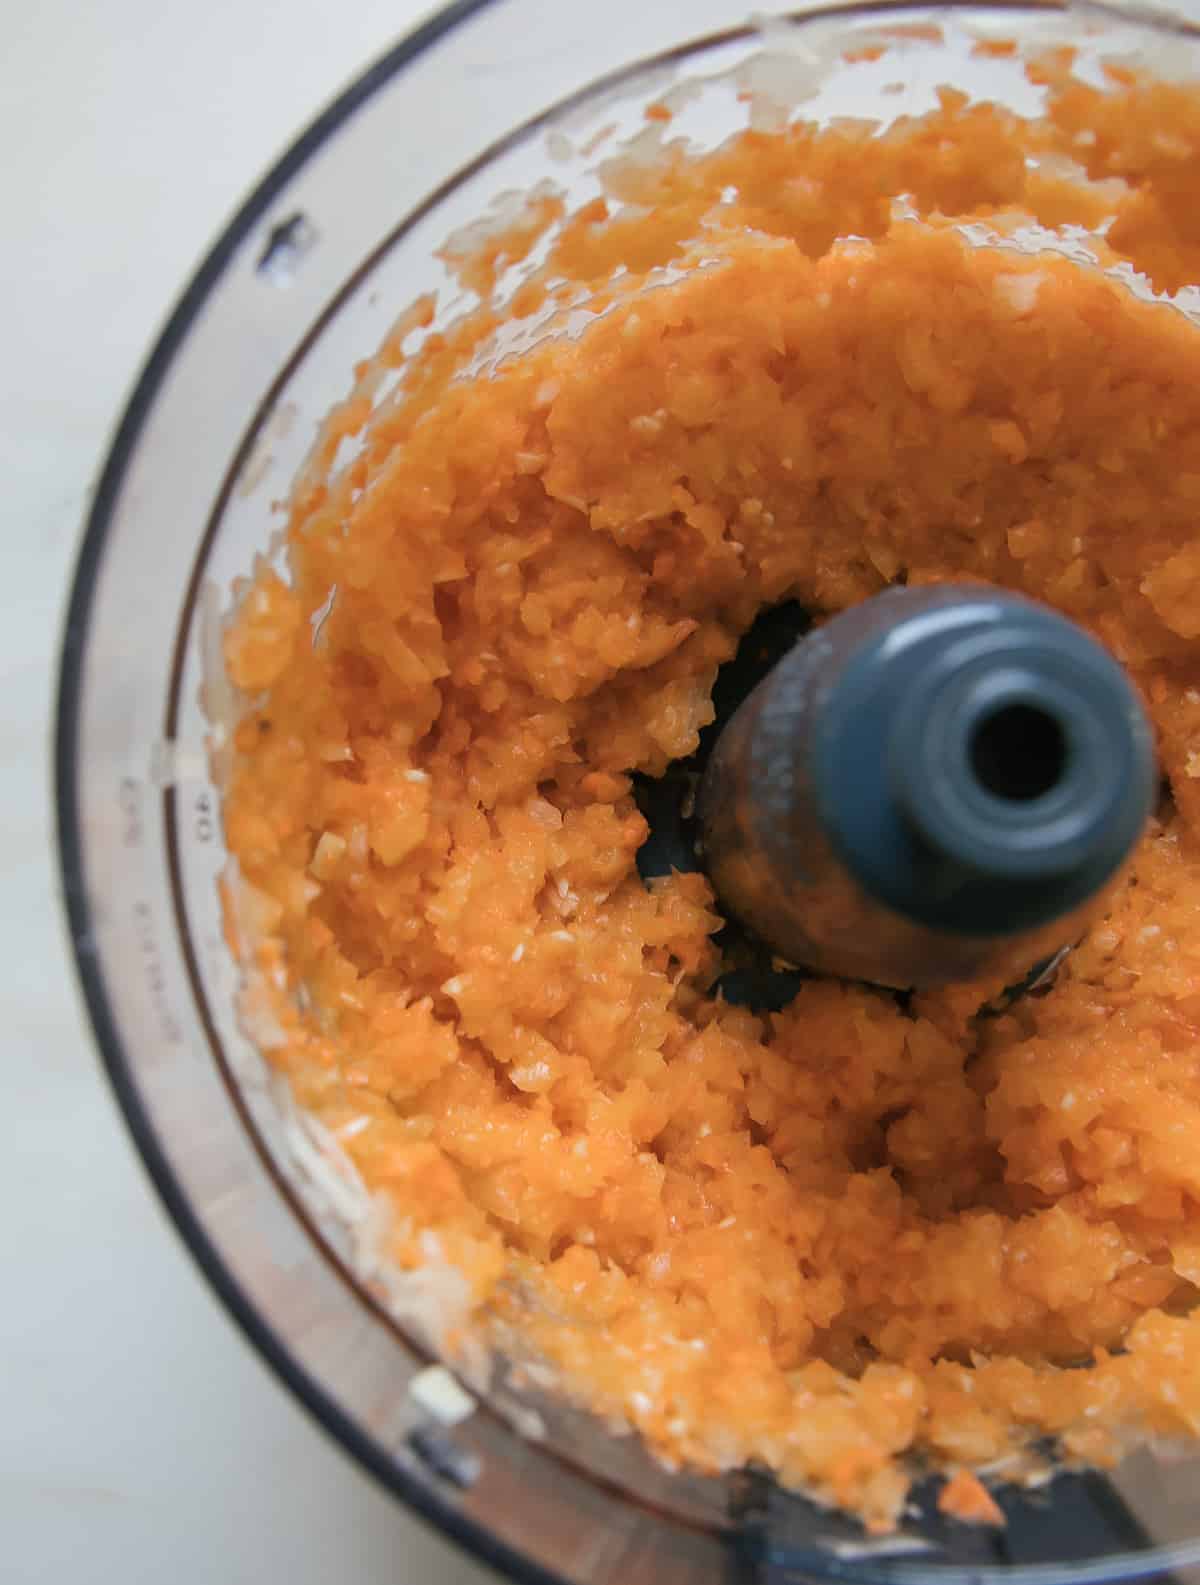 Carrot and onion all diced up in food processor. 